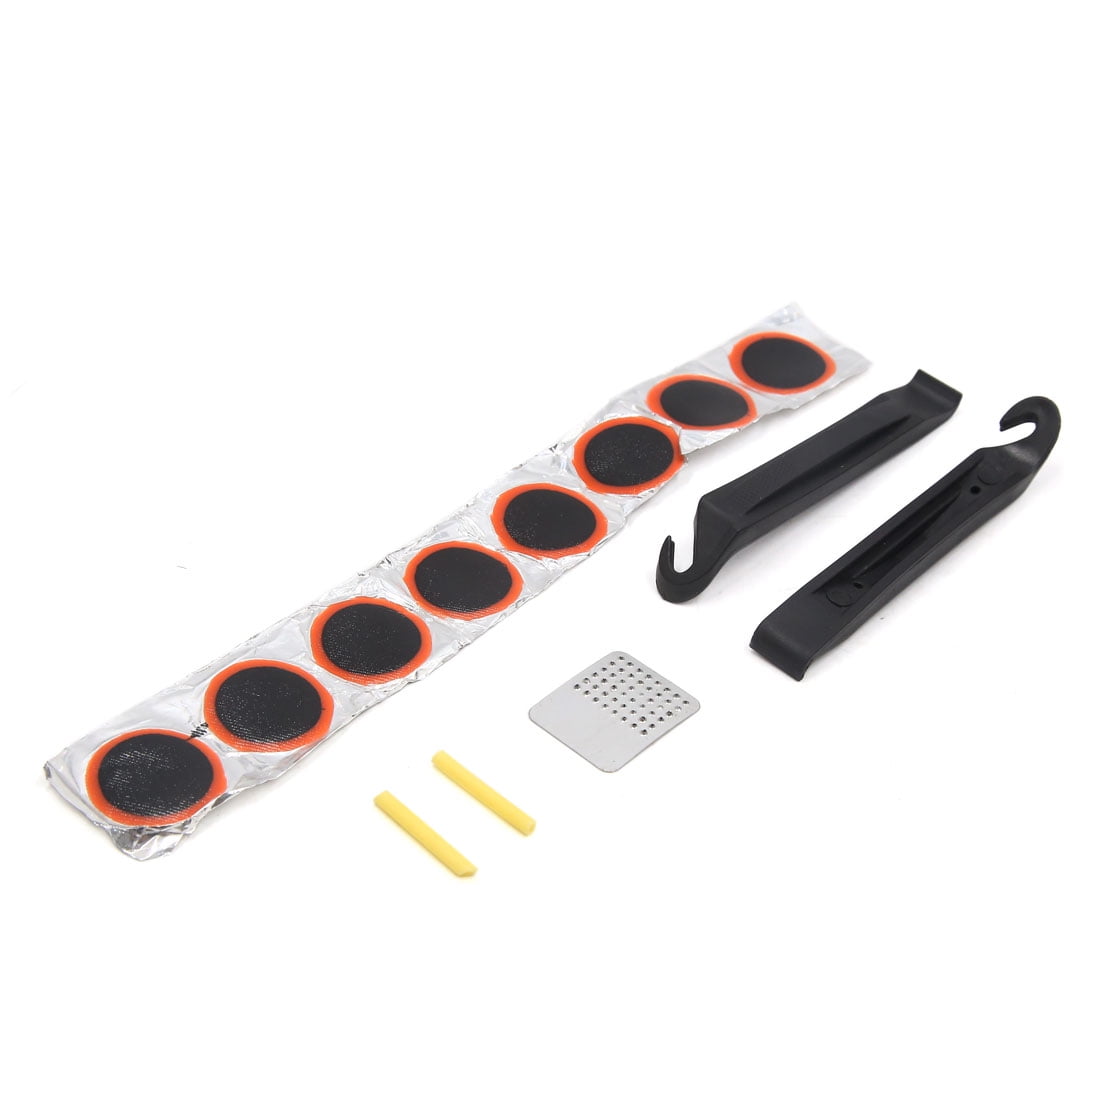 Bicycle Bike Tire Tyre Rubber Patch Piece Puncture Repair Tool Kits H CWB L3 